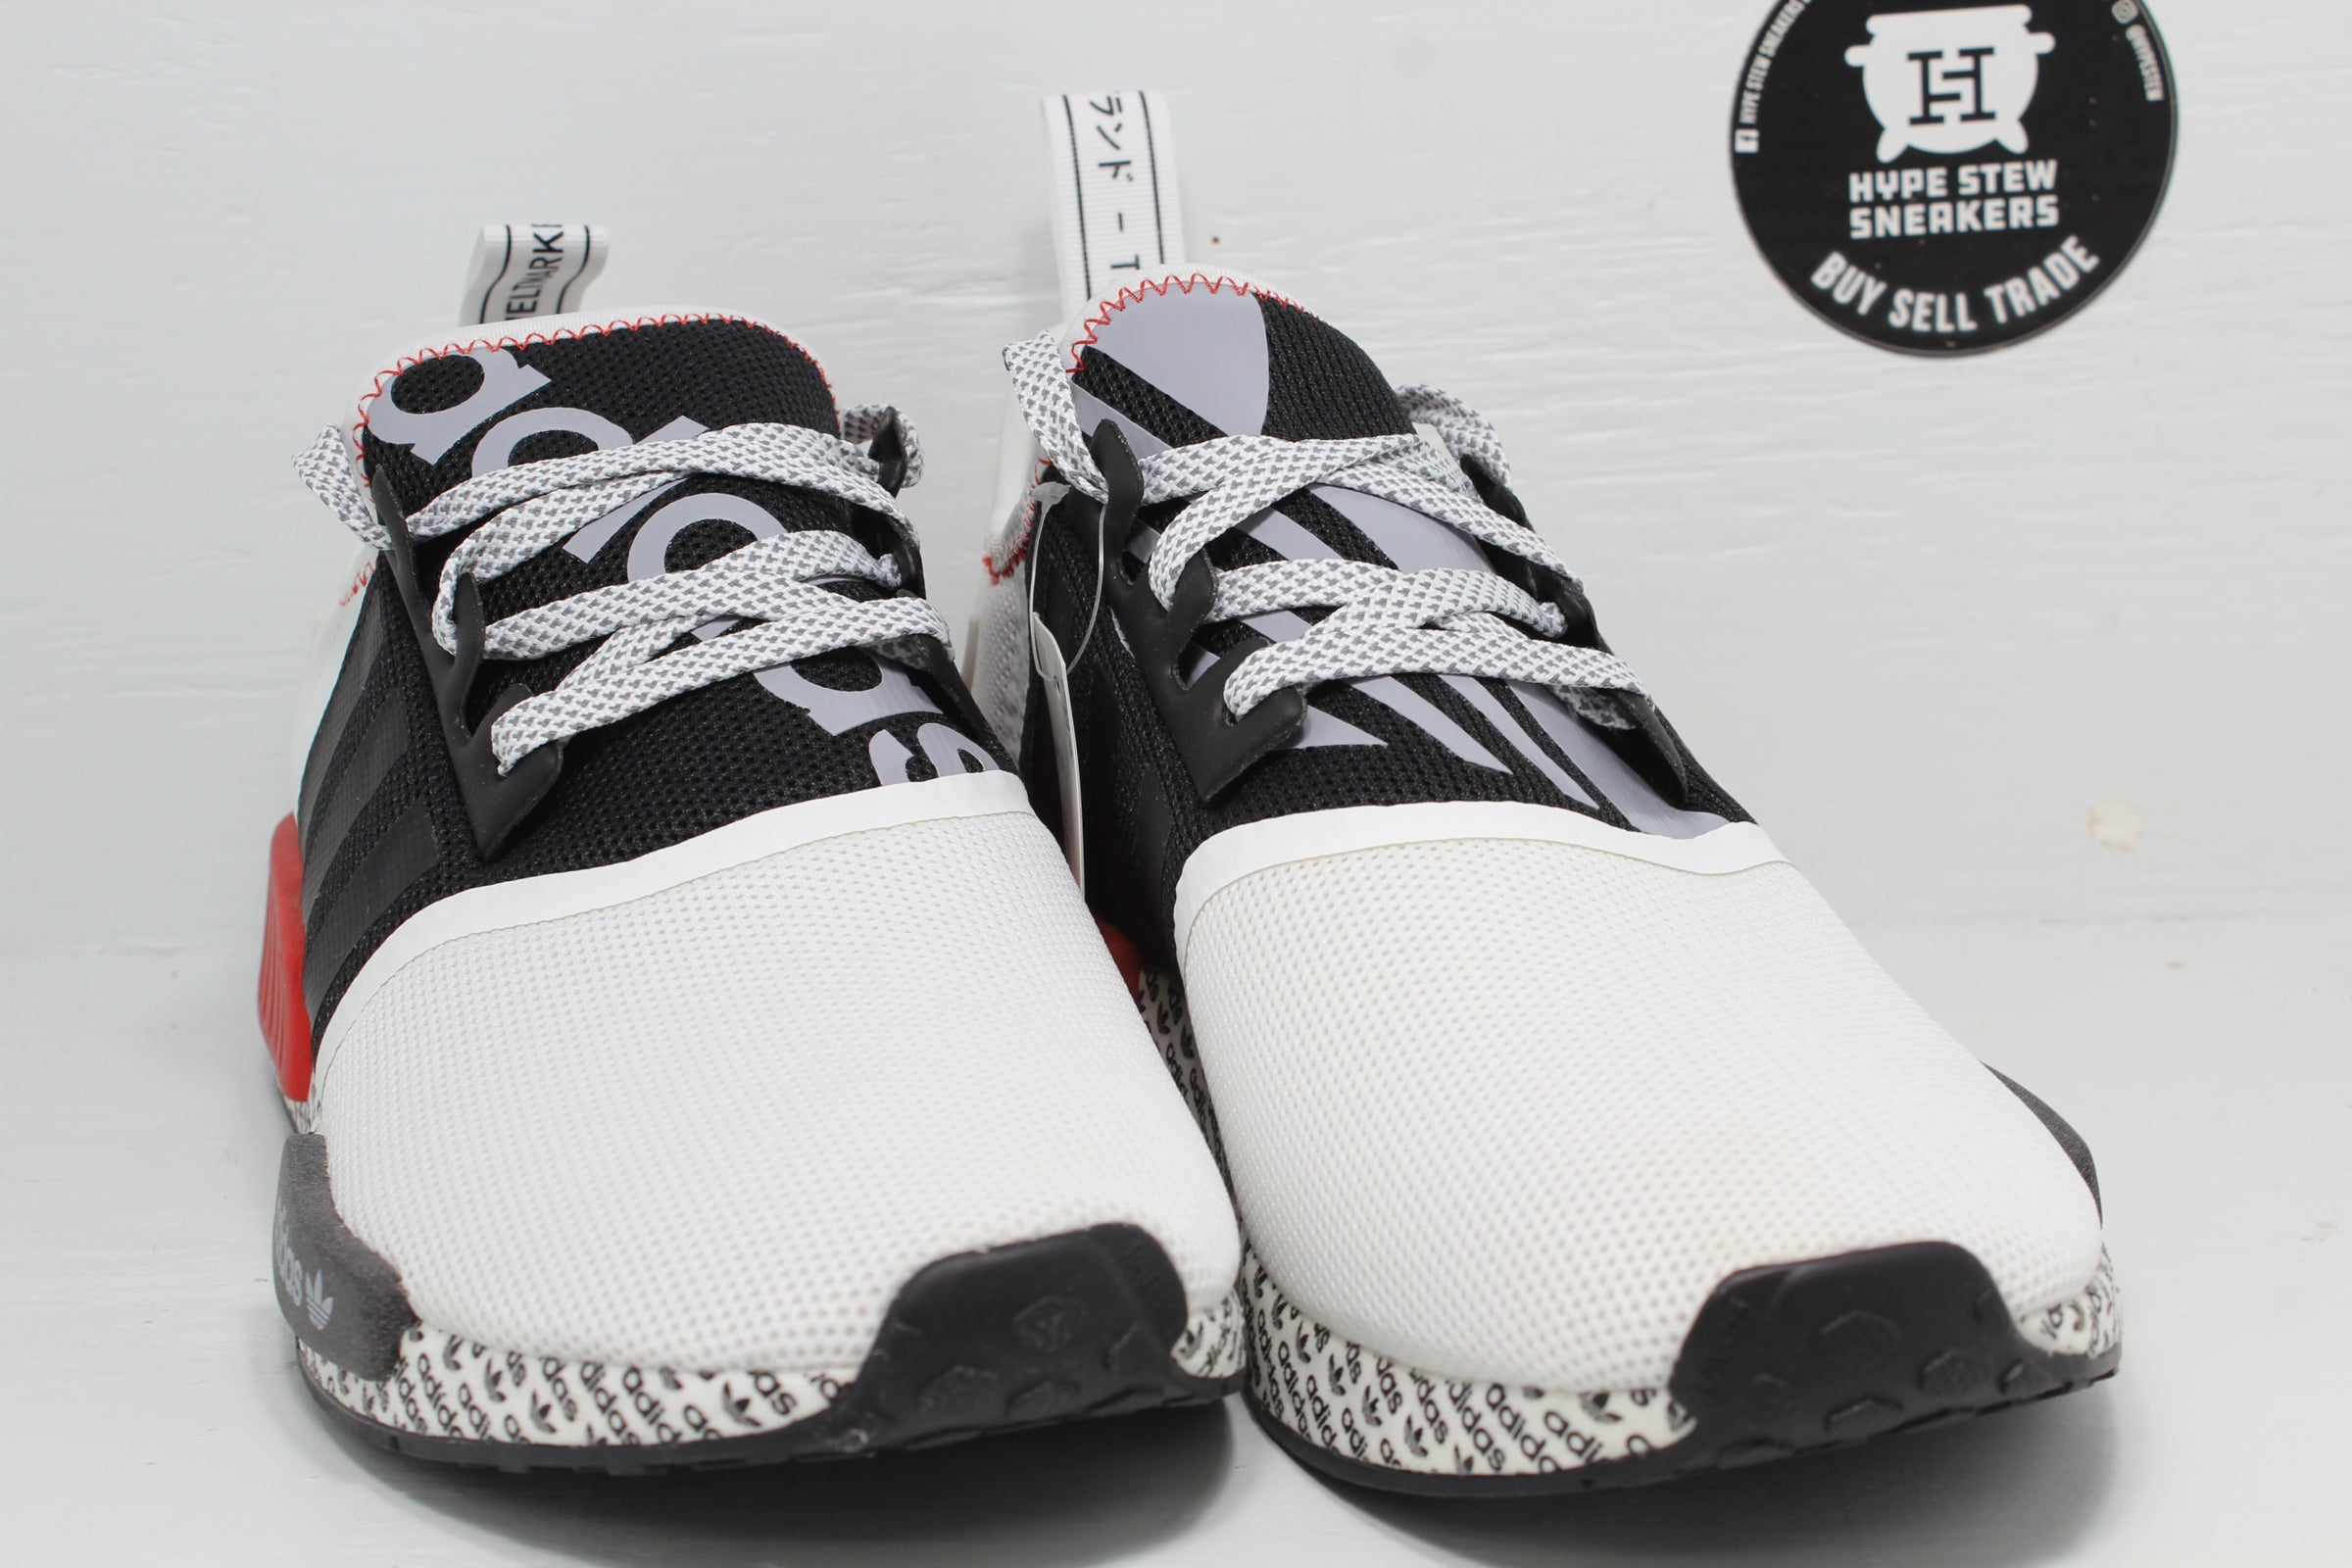 zag Tussendoortje straf Adidas NMD R1 Boost Print White Black Red | Hype Stew Sneakers Detroit